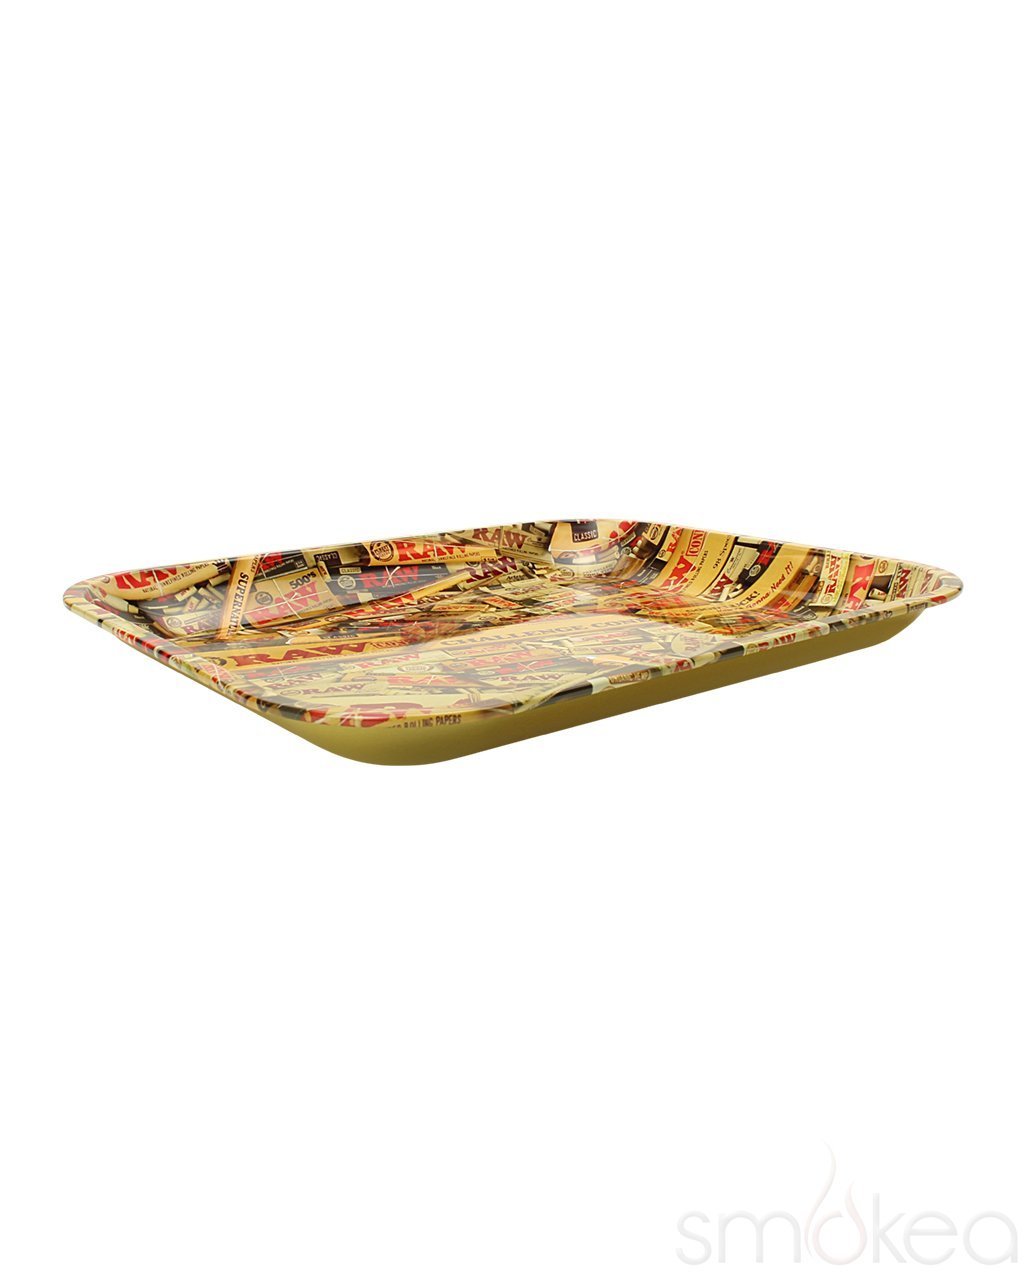 Raw Mixed Papers Large Rolling Tray - Bittchaser Smoke Shop